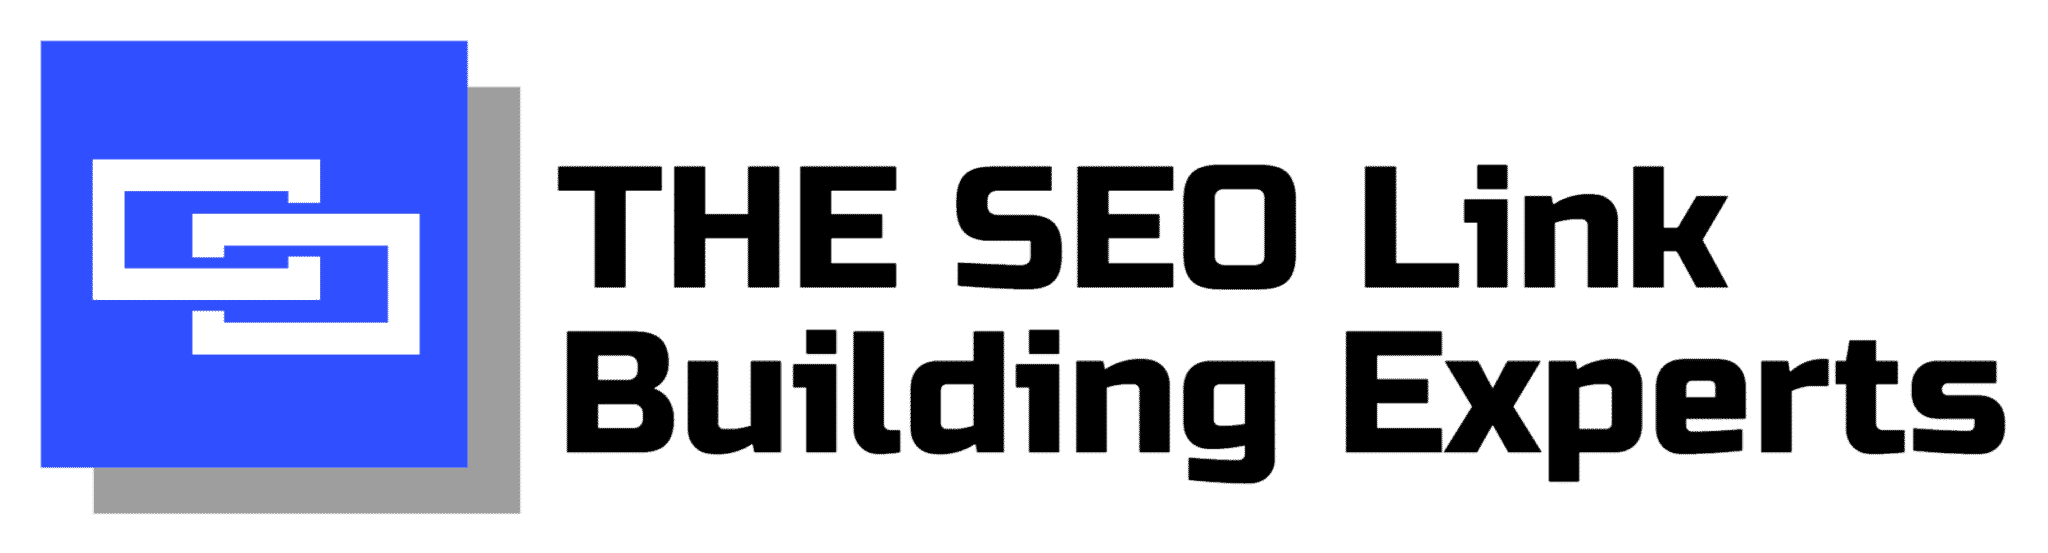 The SEO Link Building Experts Logo